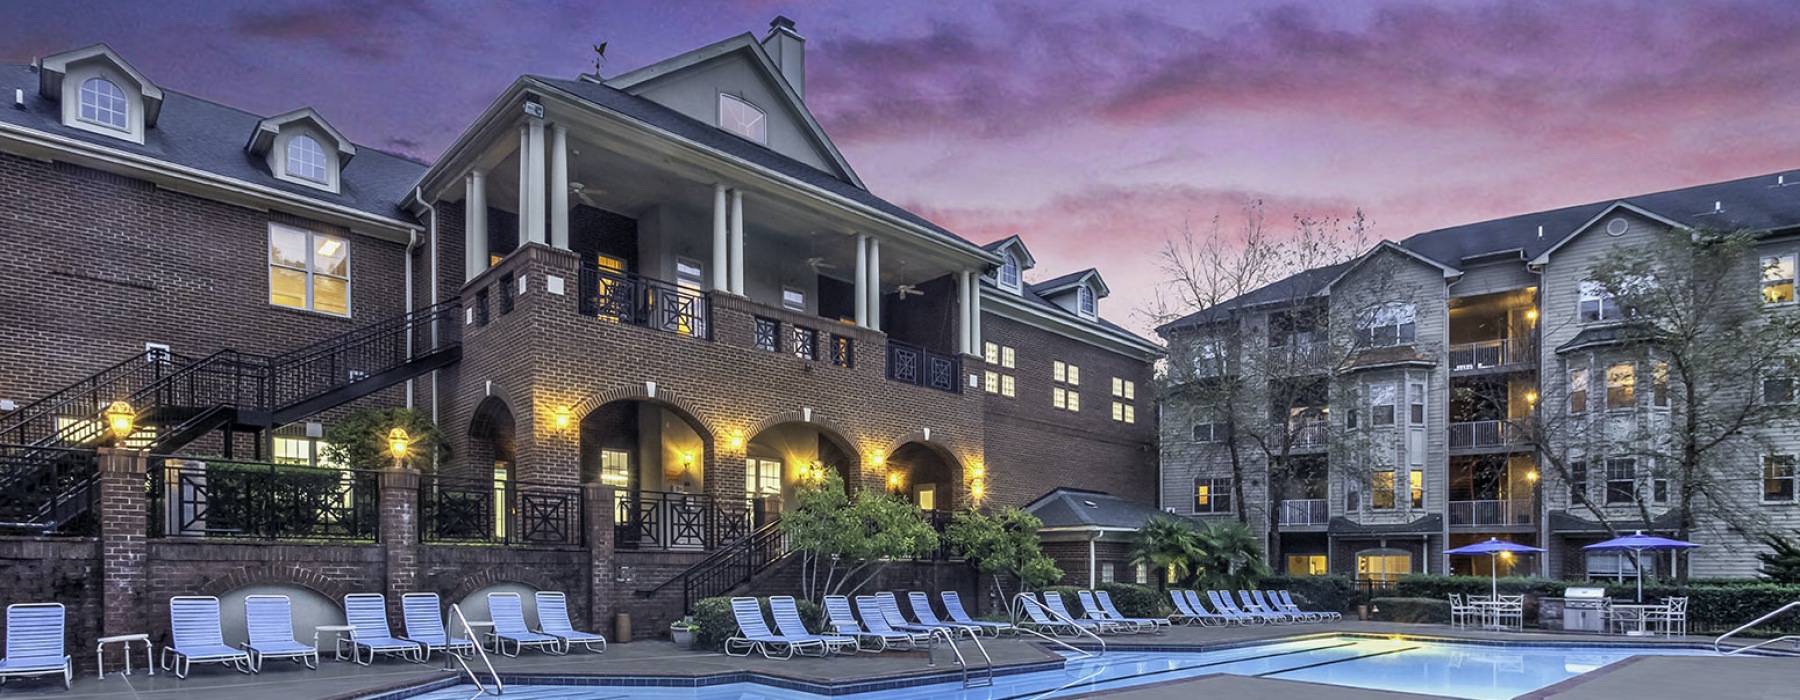 Resort-Inspired Pool At Eastover Ridge Apartments In Charlotte, NC